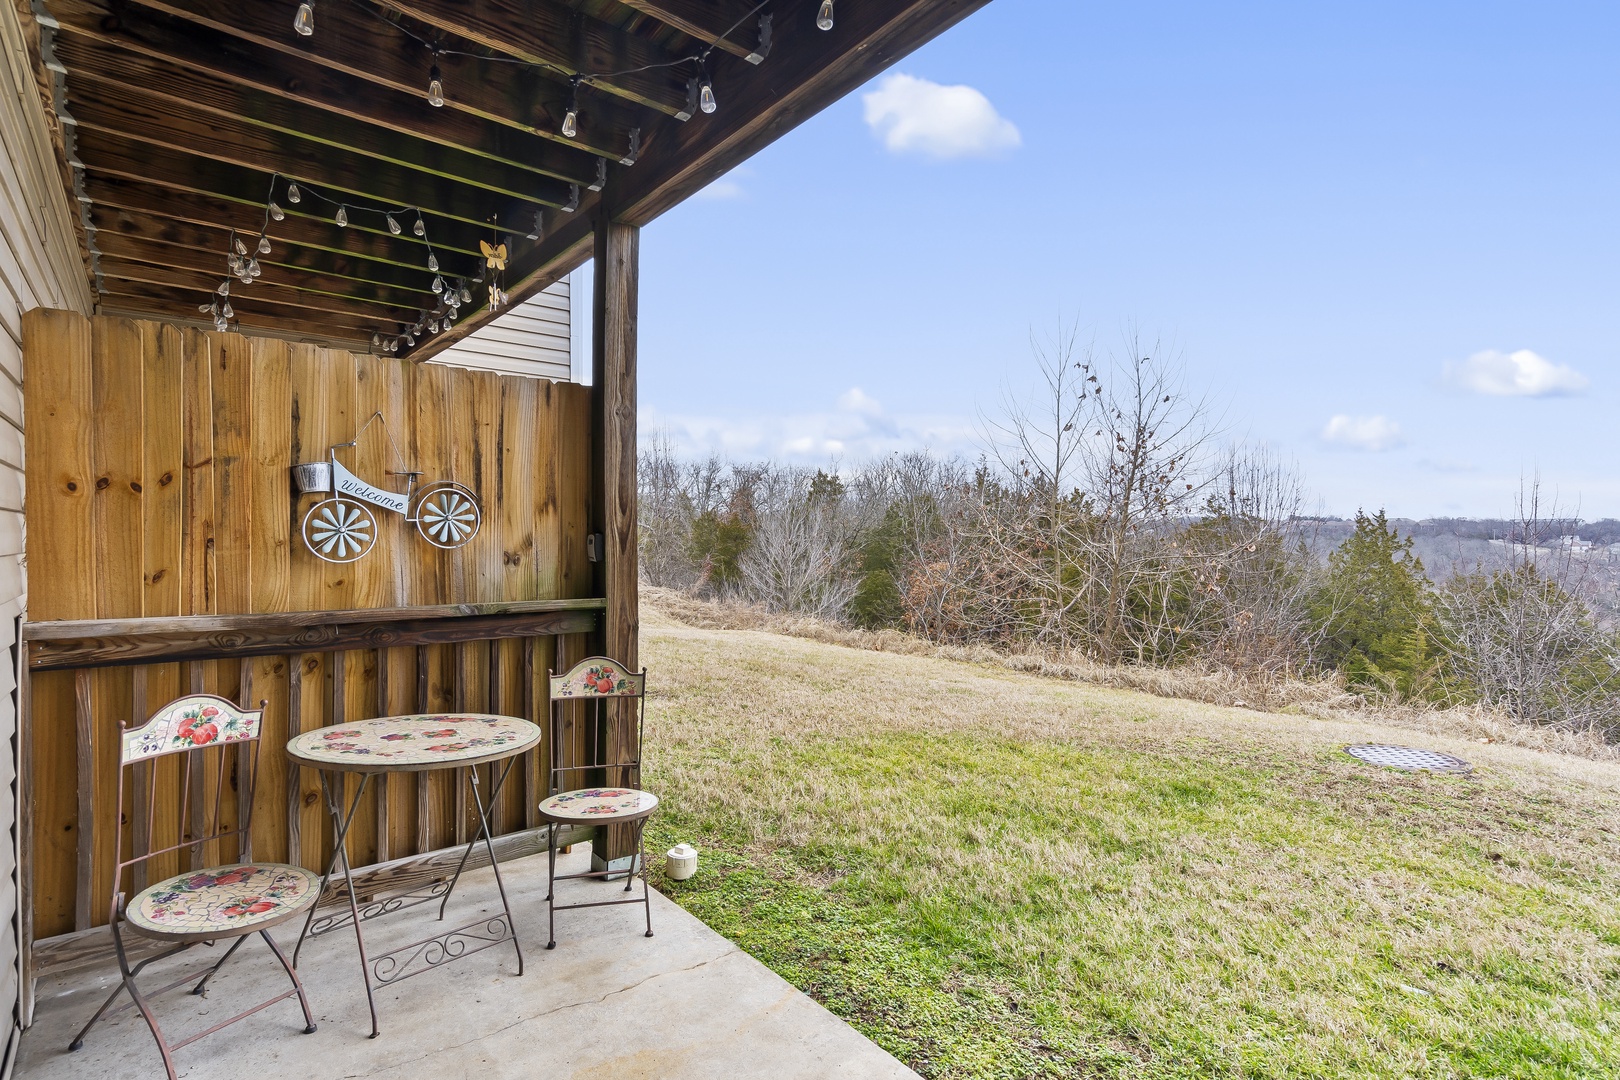 Retreat to the outdoor patio and soak in the scenic views